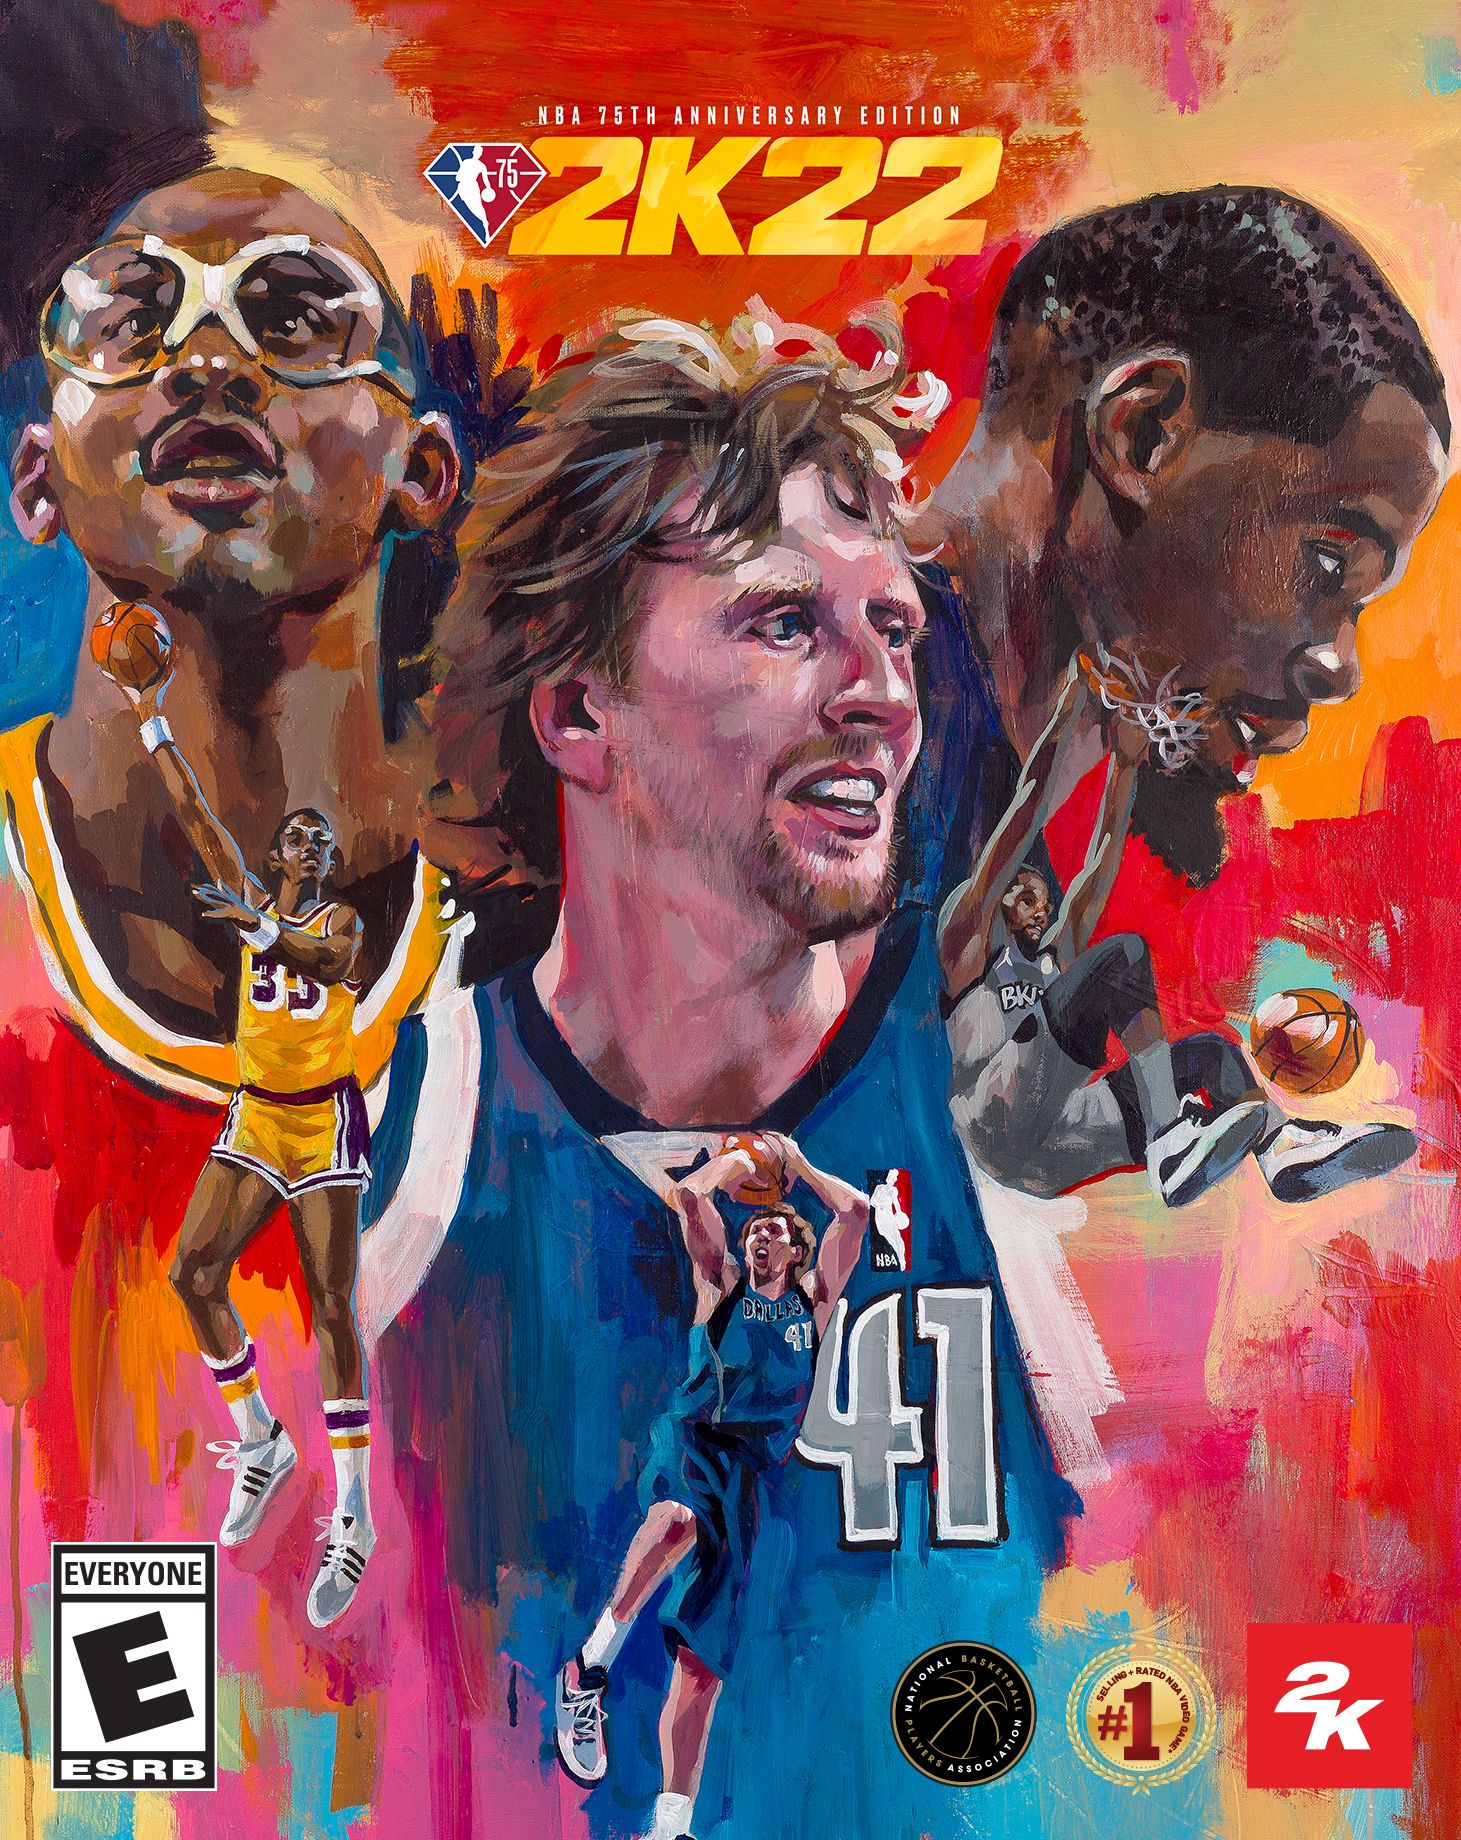 Three legends, grace the cover of the special edition of NBA 2K22